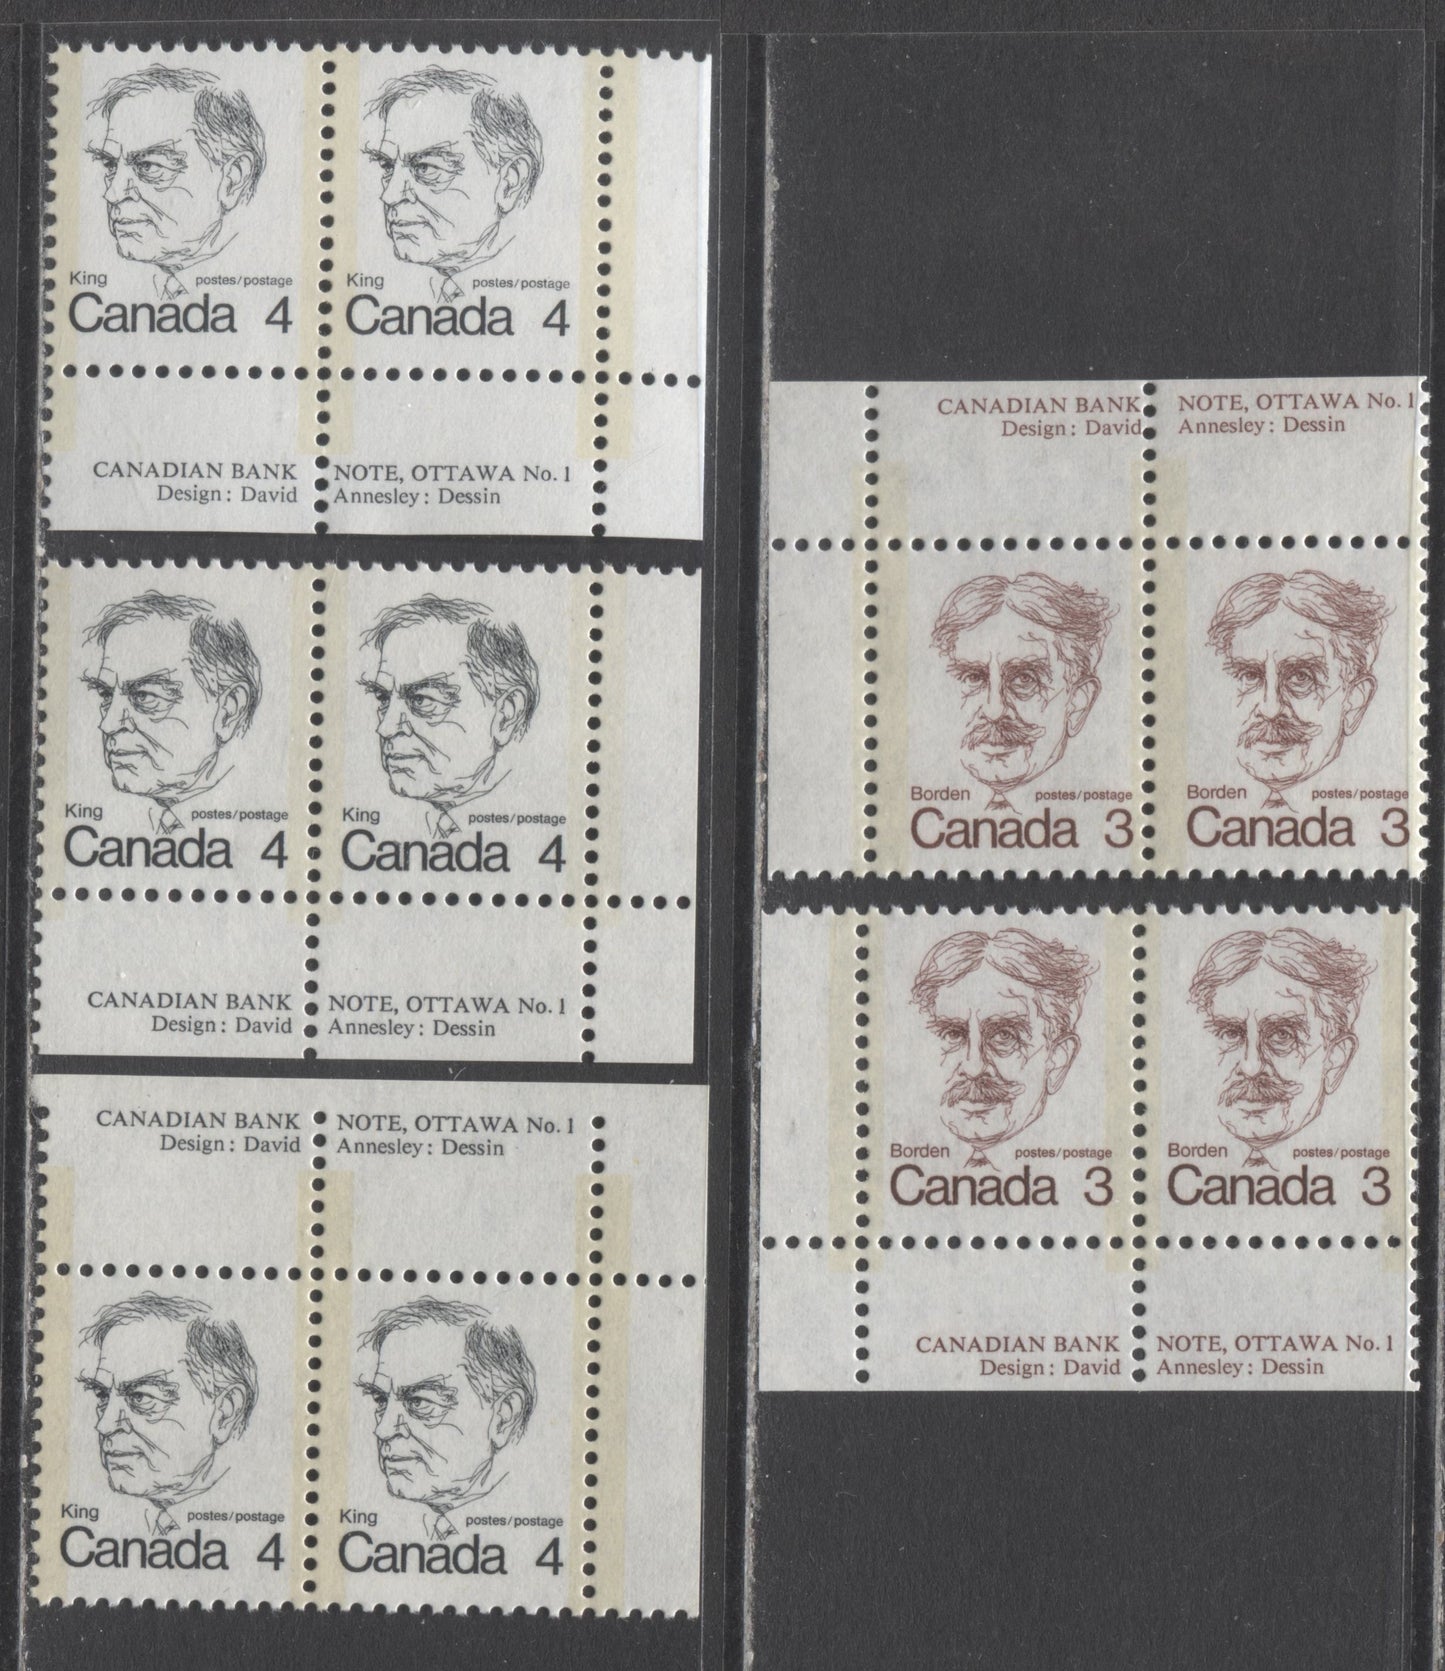 Lot 308 Canada #588, 589, 589ii 3c-4c Maroon-Black Borden-King, 1973 - 1976 Caricature Issue, 5 VFNH Plate Pairs With Various DF & MF Papers Including Unlisted Types